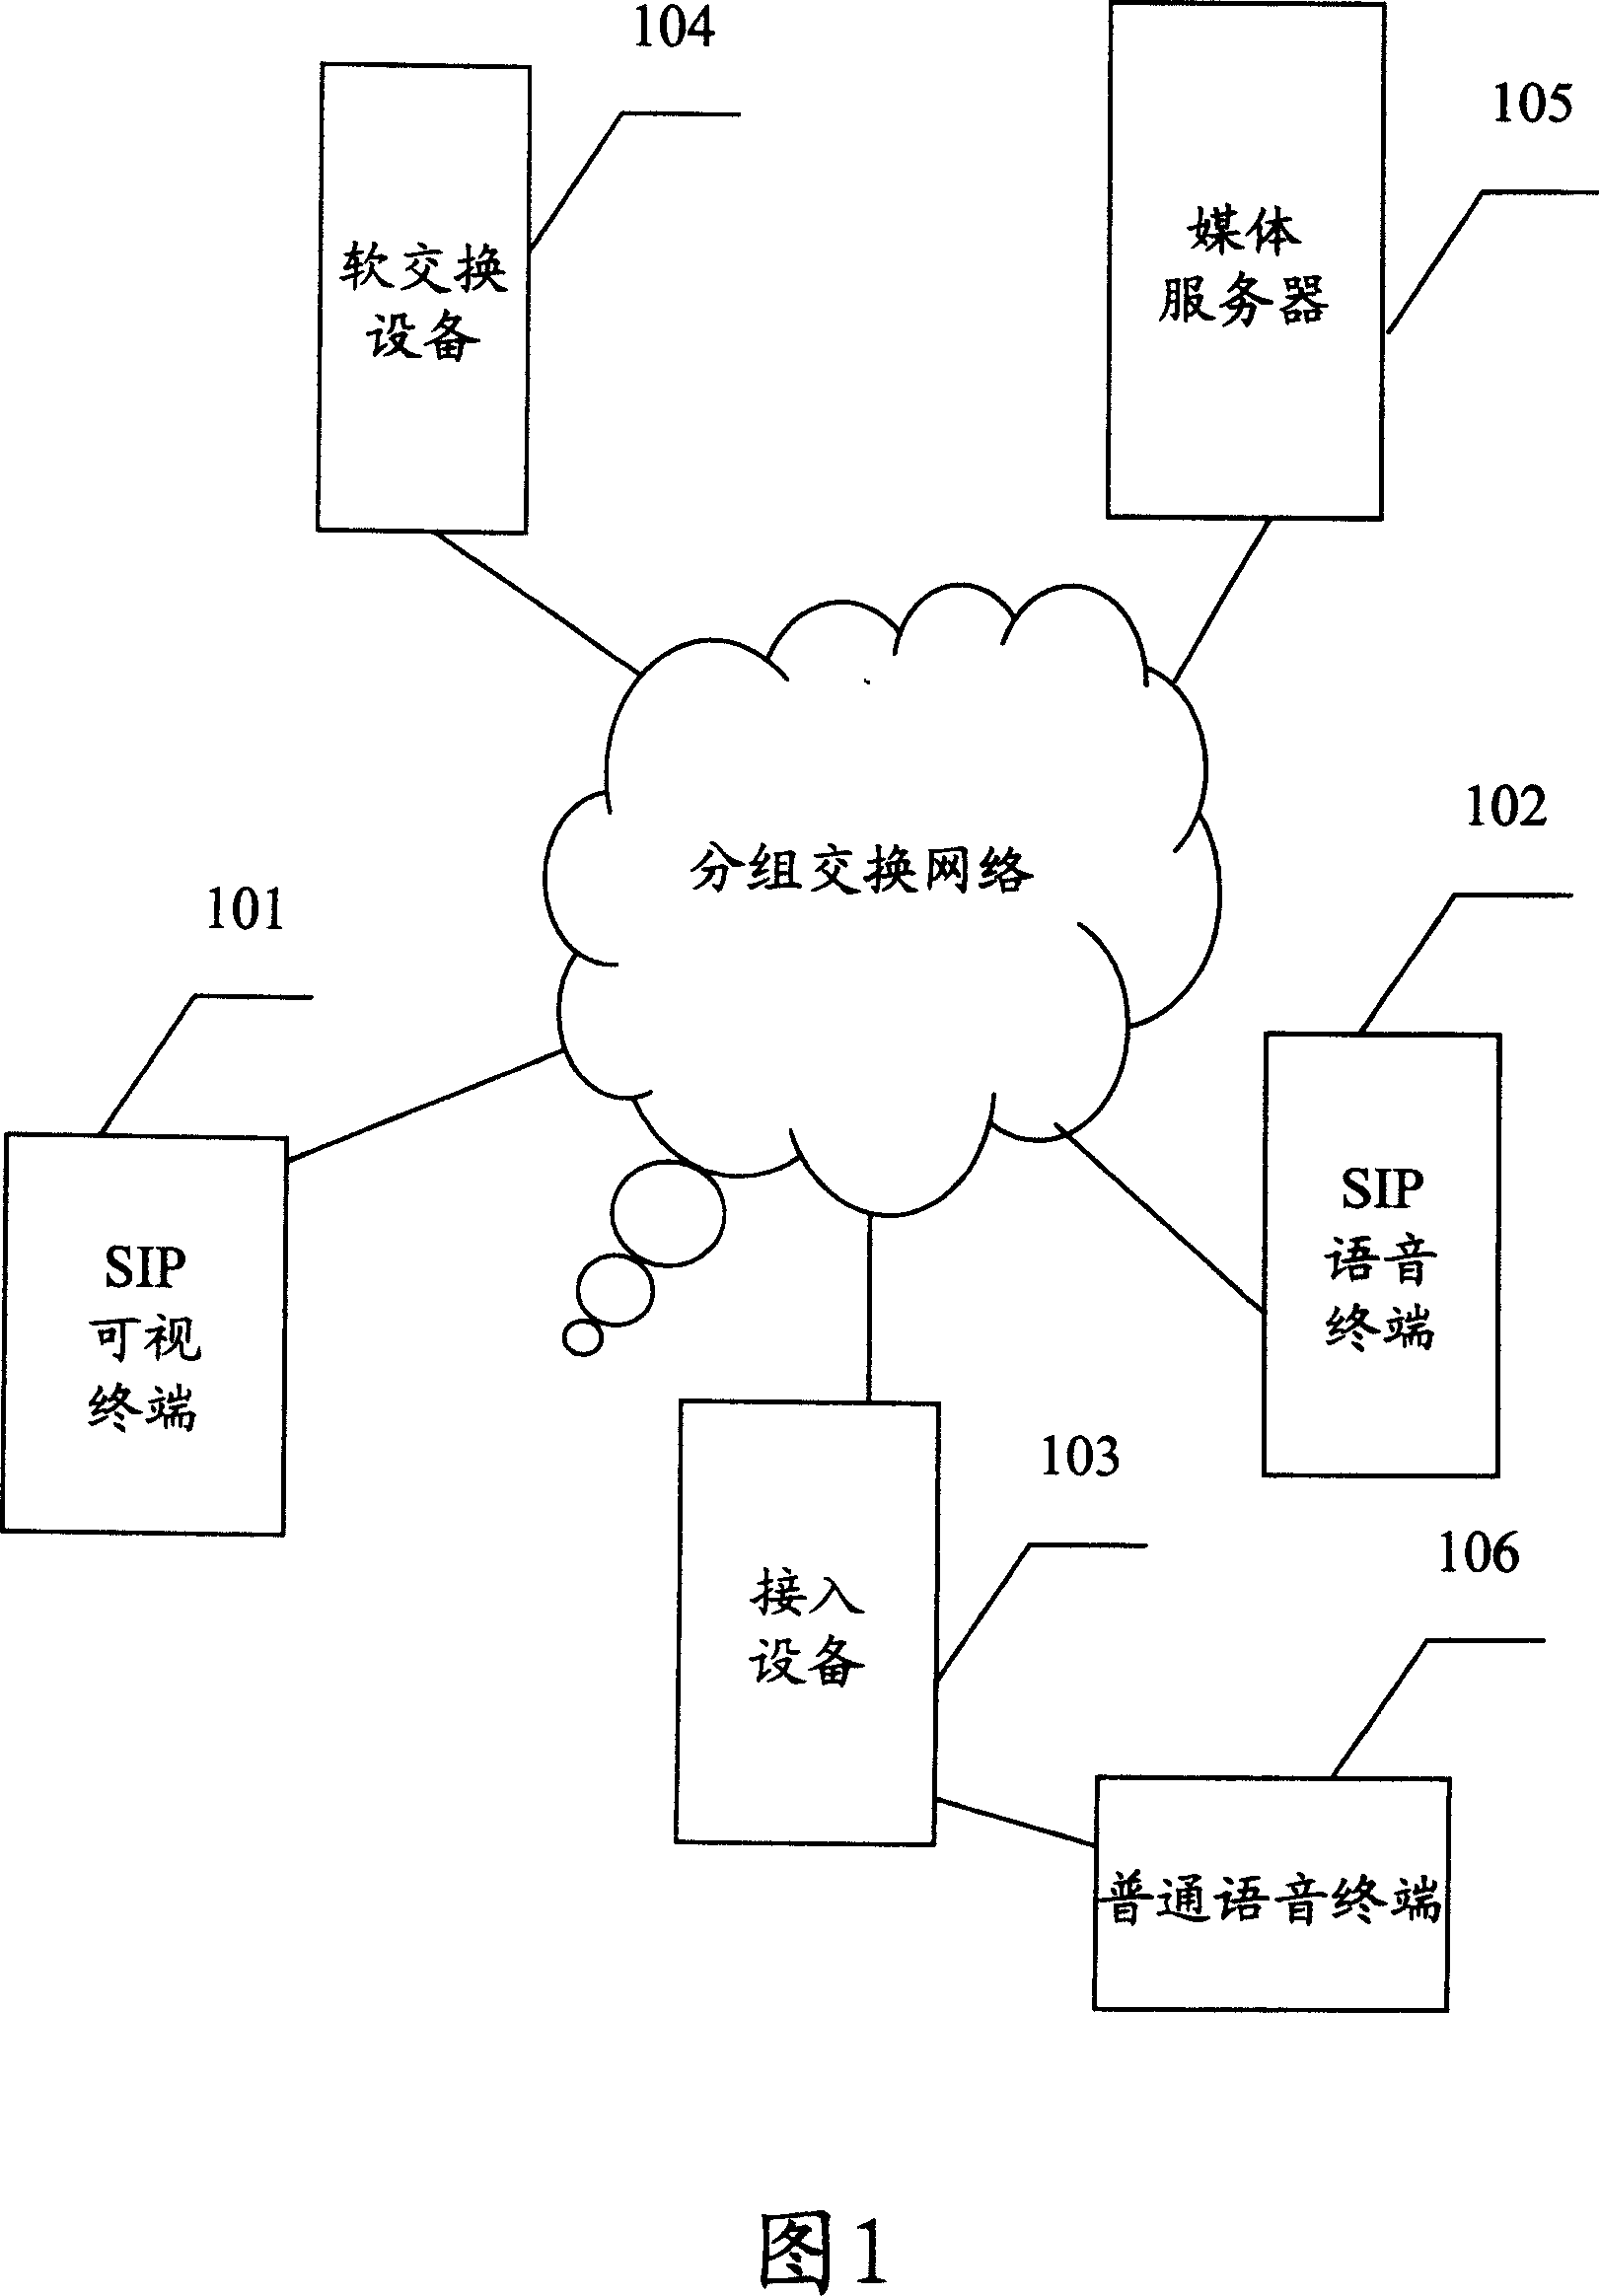 System and method for supplying echo-bell imaging service in next generation network